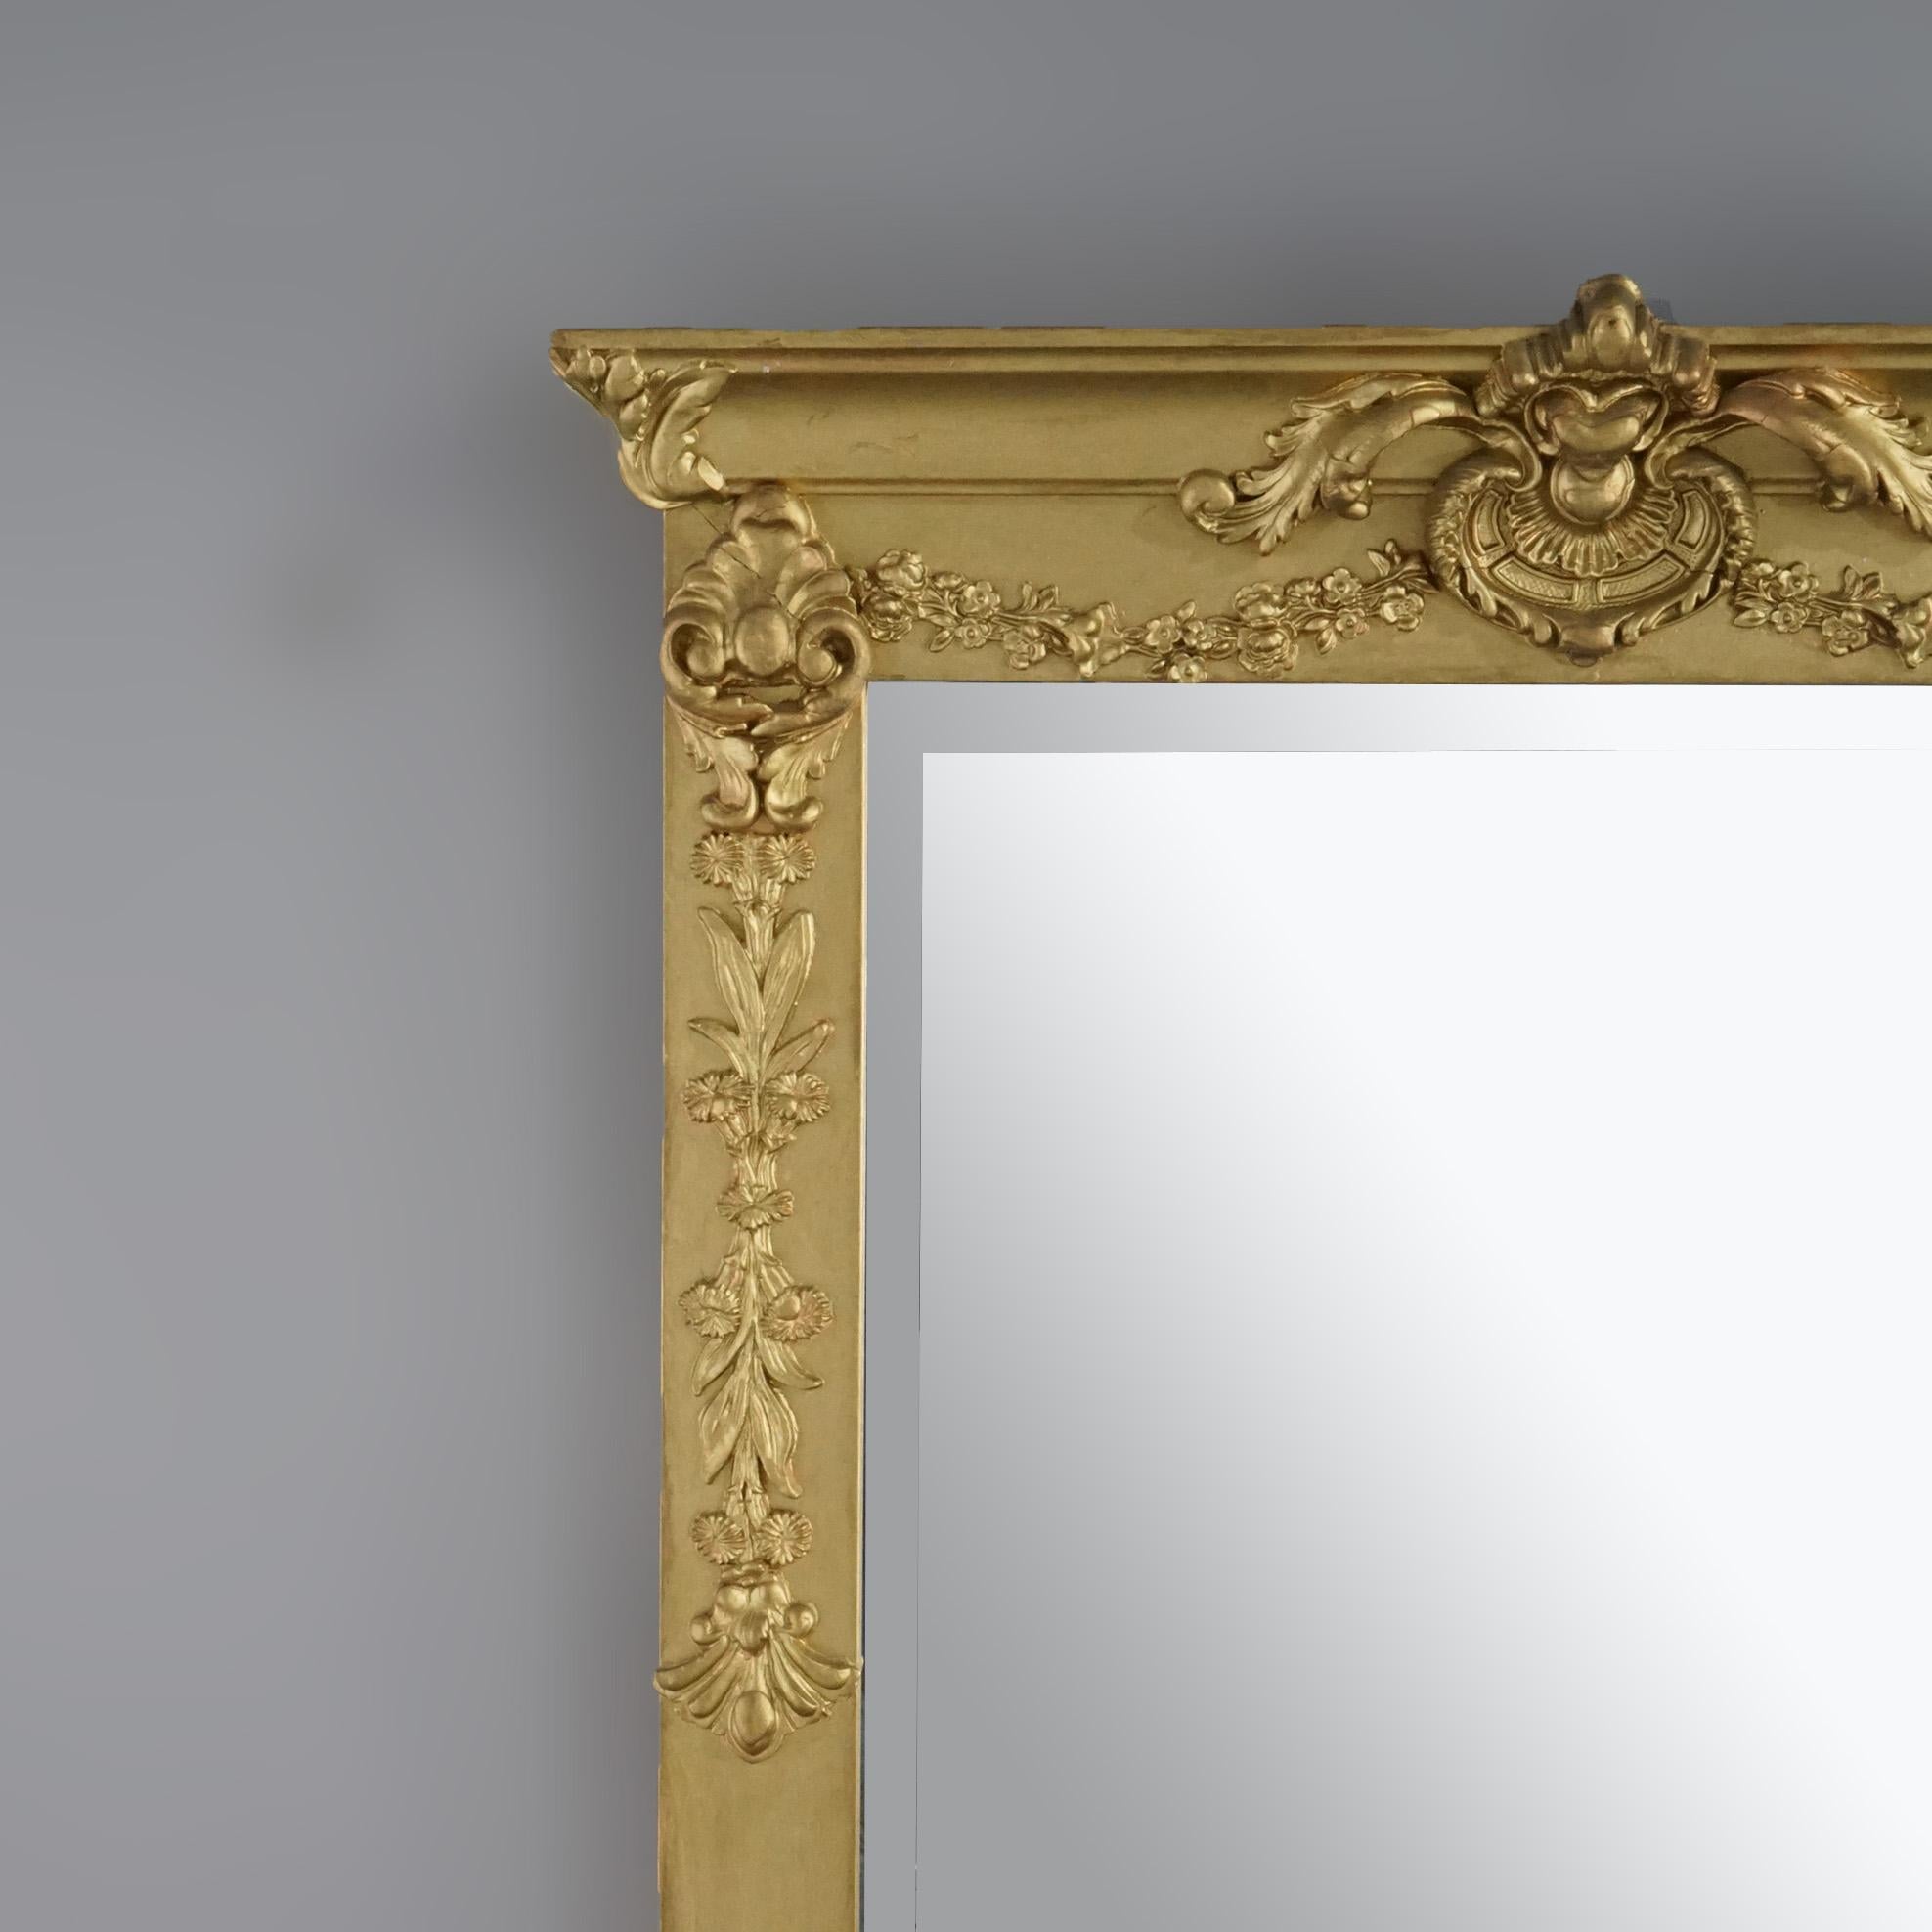 An antique French wall mirror offers giltwood frame with foliate elements throughout and housing beveled mirror plate, c1900

Measures- Overall 47.25''H x 25''W x 3.5''D; sight 19'' x 41''